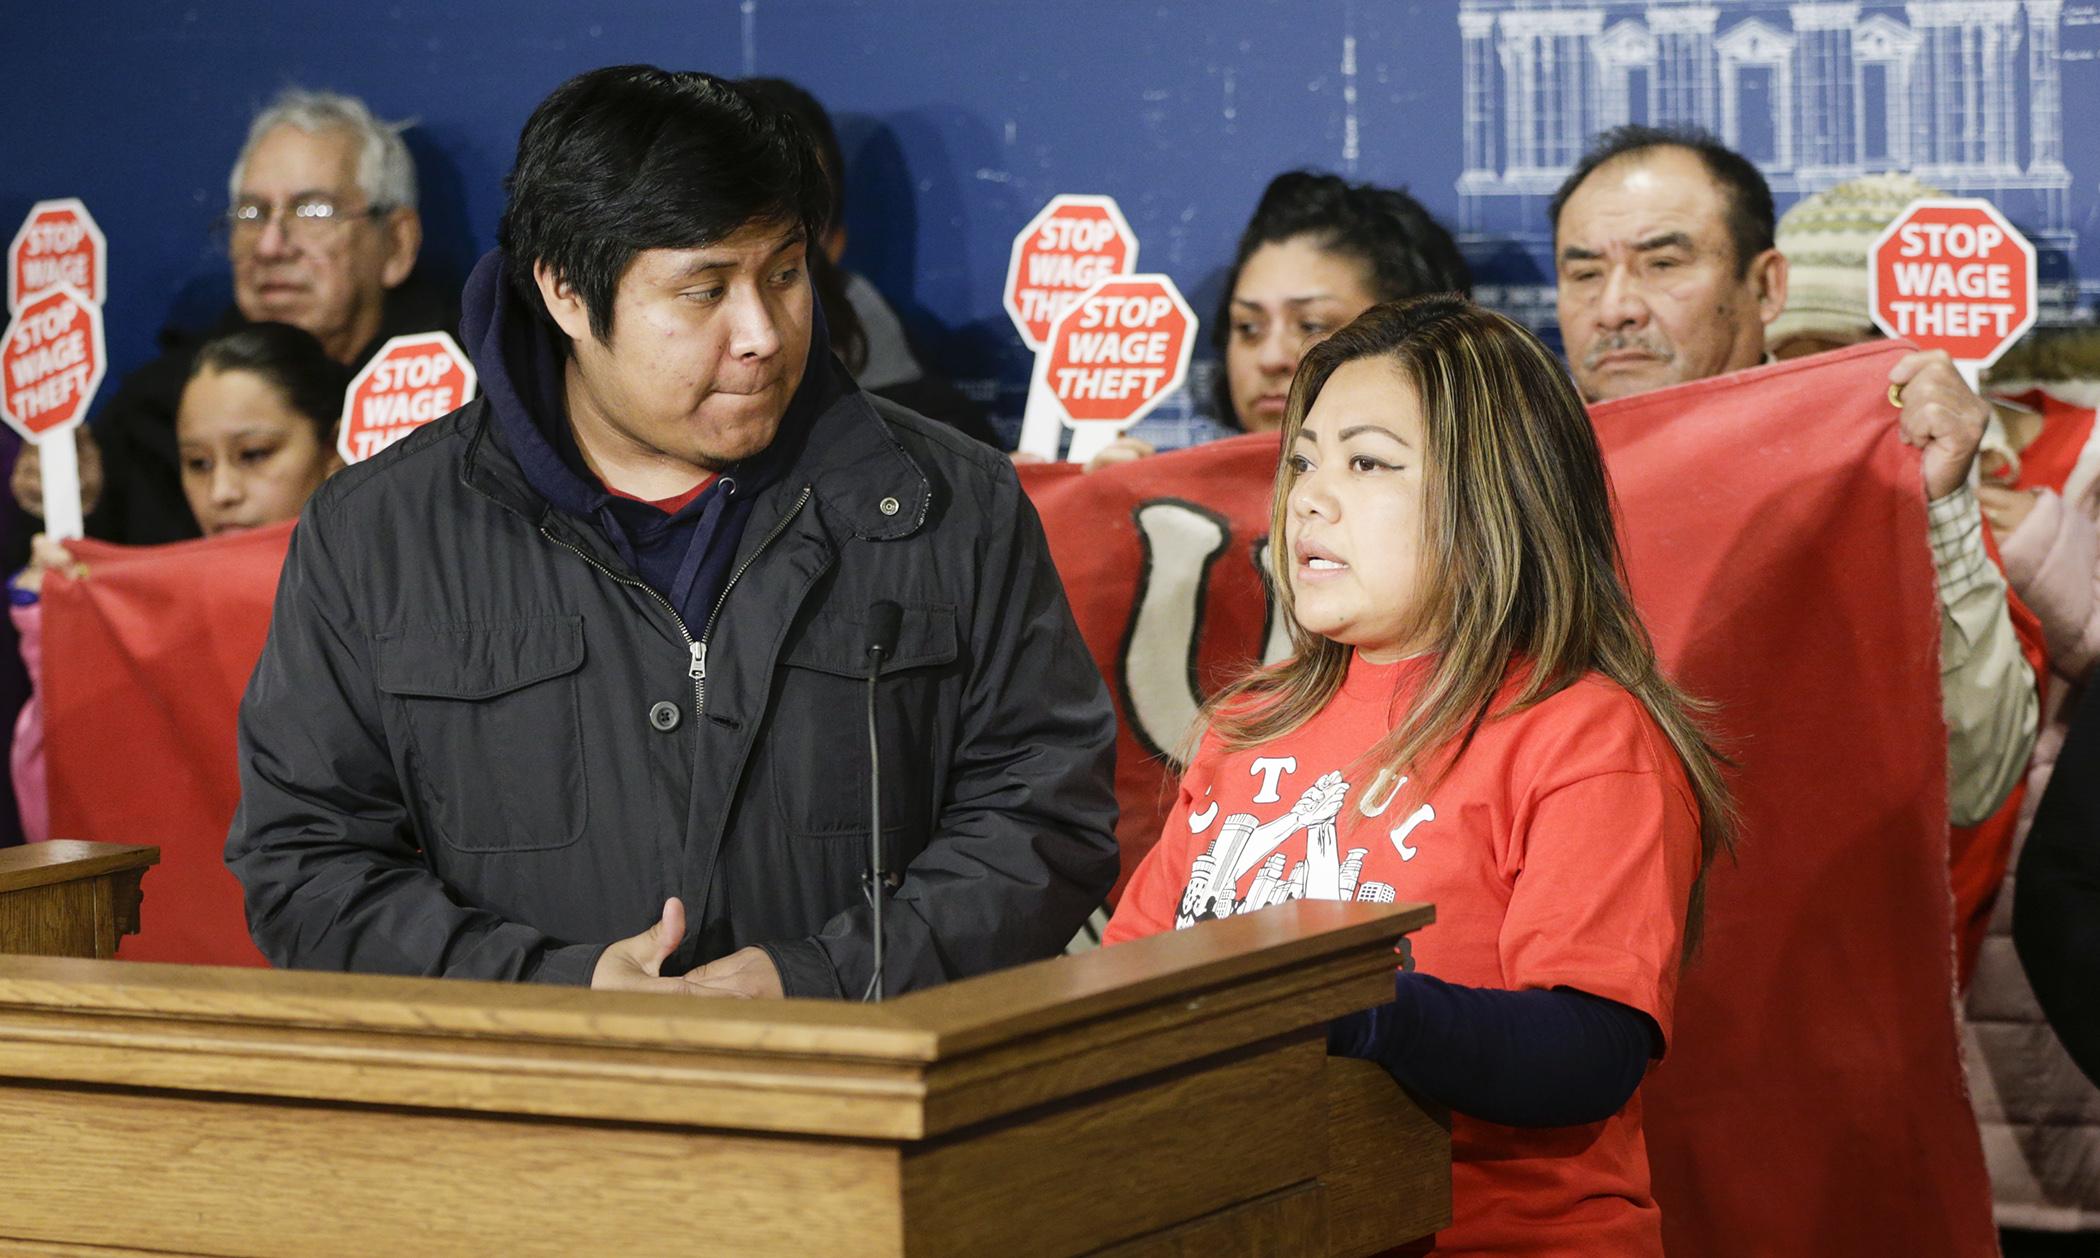 Cecilia Guzman, right, speaks at a news conference Wednesday about having her wages stolen at a former job. The House Labor Committee later heard and approved a bill that would prohibit wage theft. Photo by Paul Battaglia